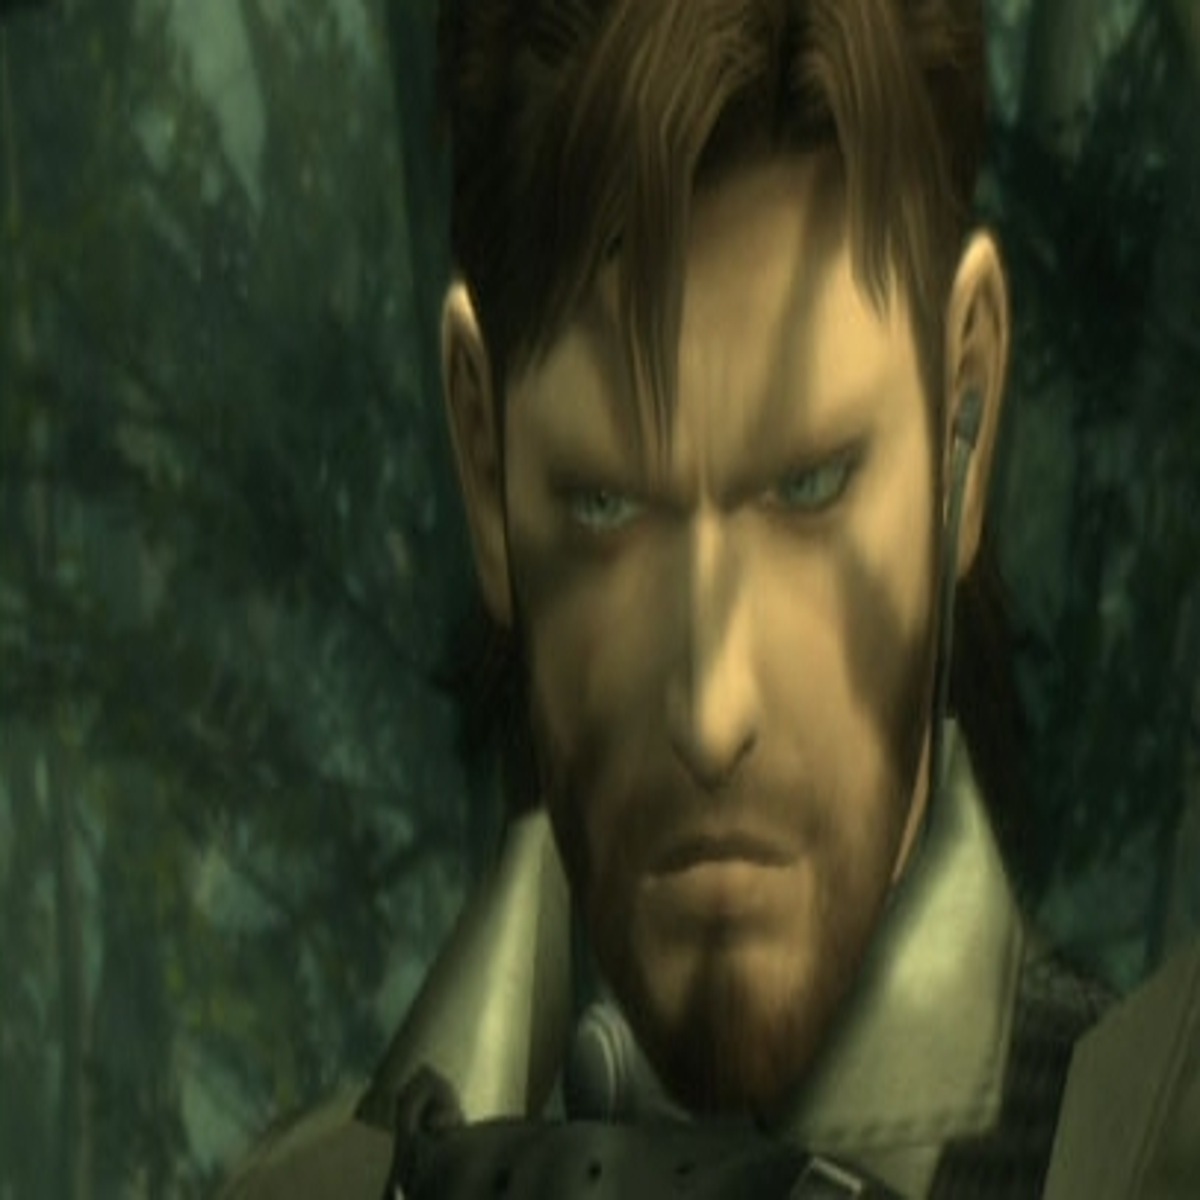 Metal Gear Solid 2 and 3 HD hit Xbox One, VentureBeat